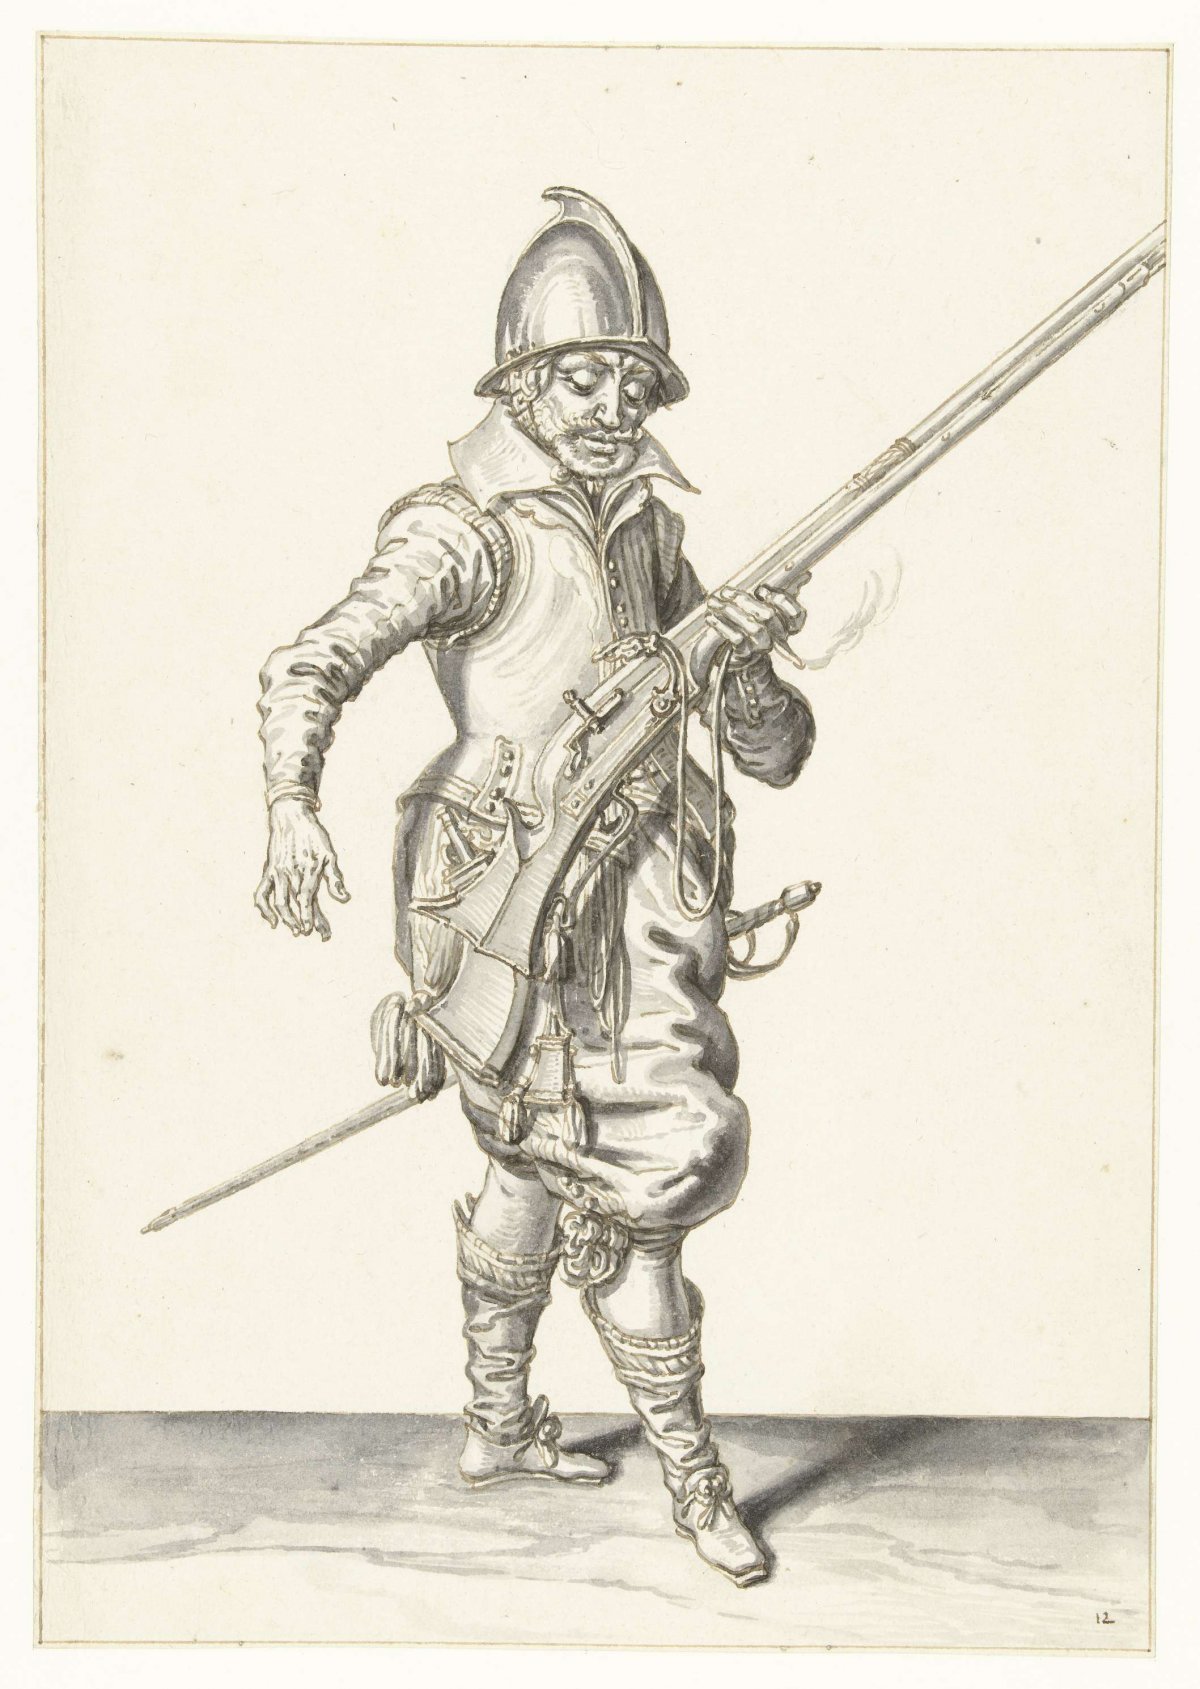 Soldier holding his helm with his left hand angled upward, Jacques de Gheyn (II), 1596 - 1606